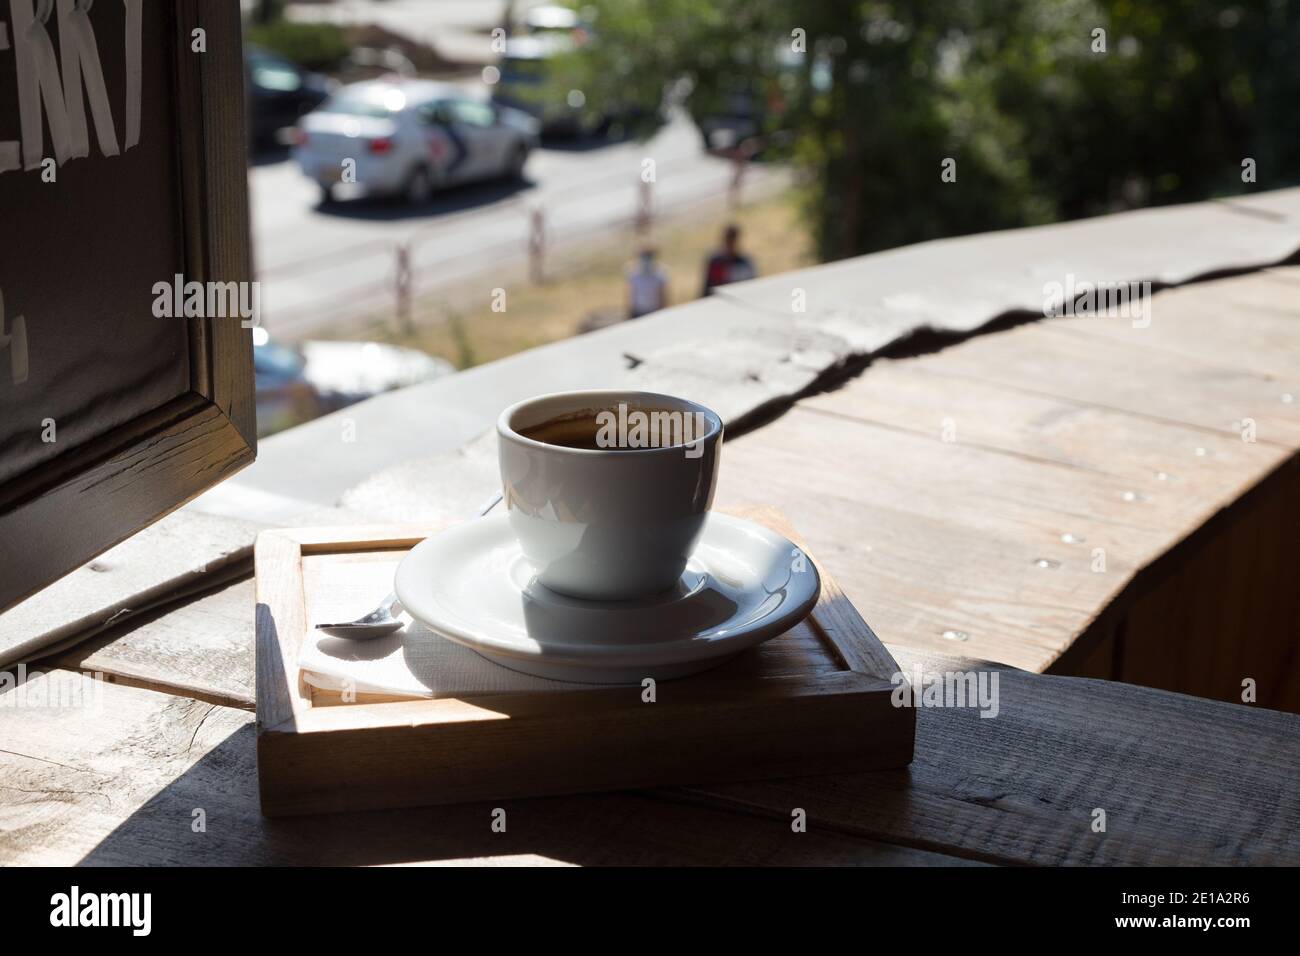 Cup of coffee on a wooden table. Close-up. Stock Photo